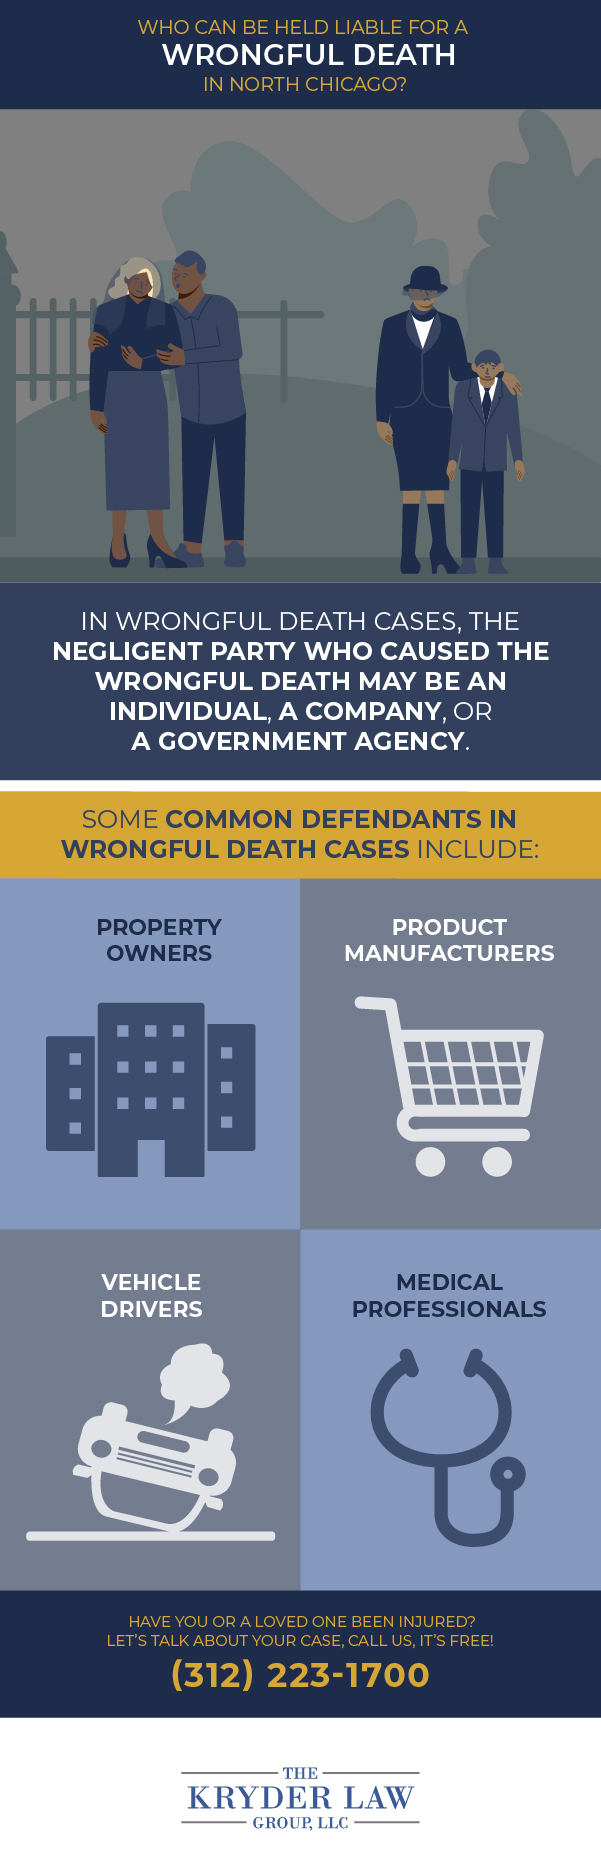 The Benefits of Hiring a North Chicago Wrongful Death Lawyer Infographic